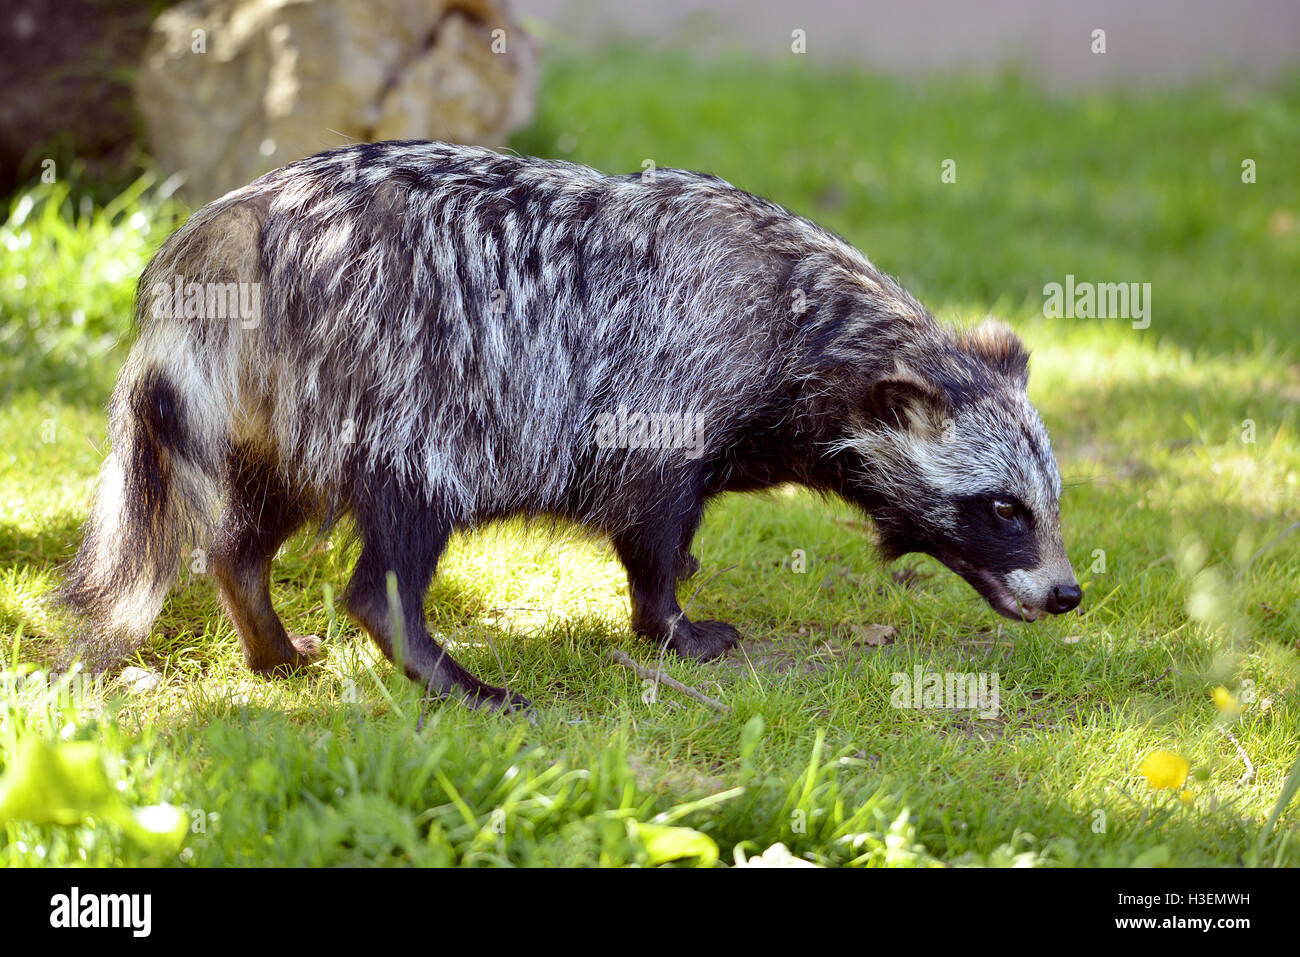 Raccoon dog (Nyctereutes procyonoides) on grass seen from profile Stock Photo